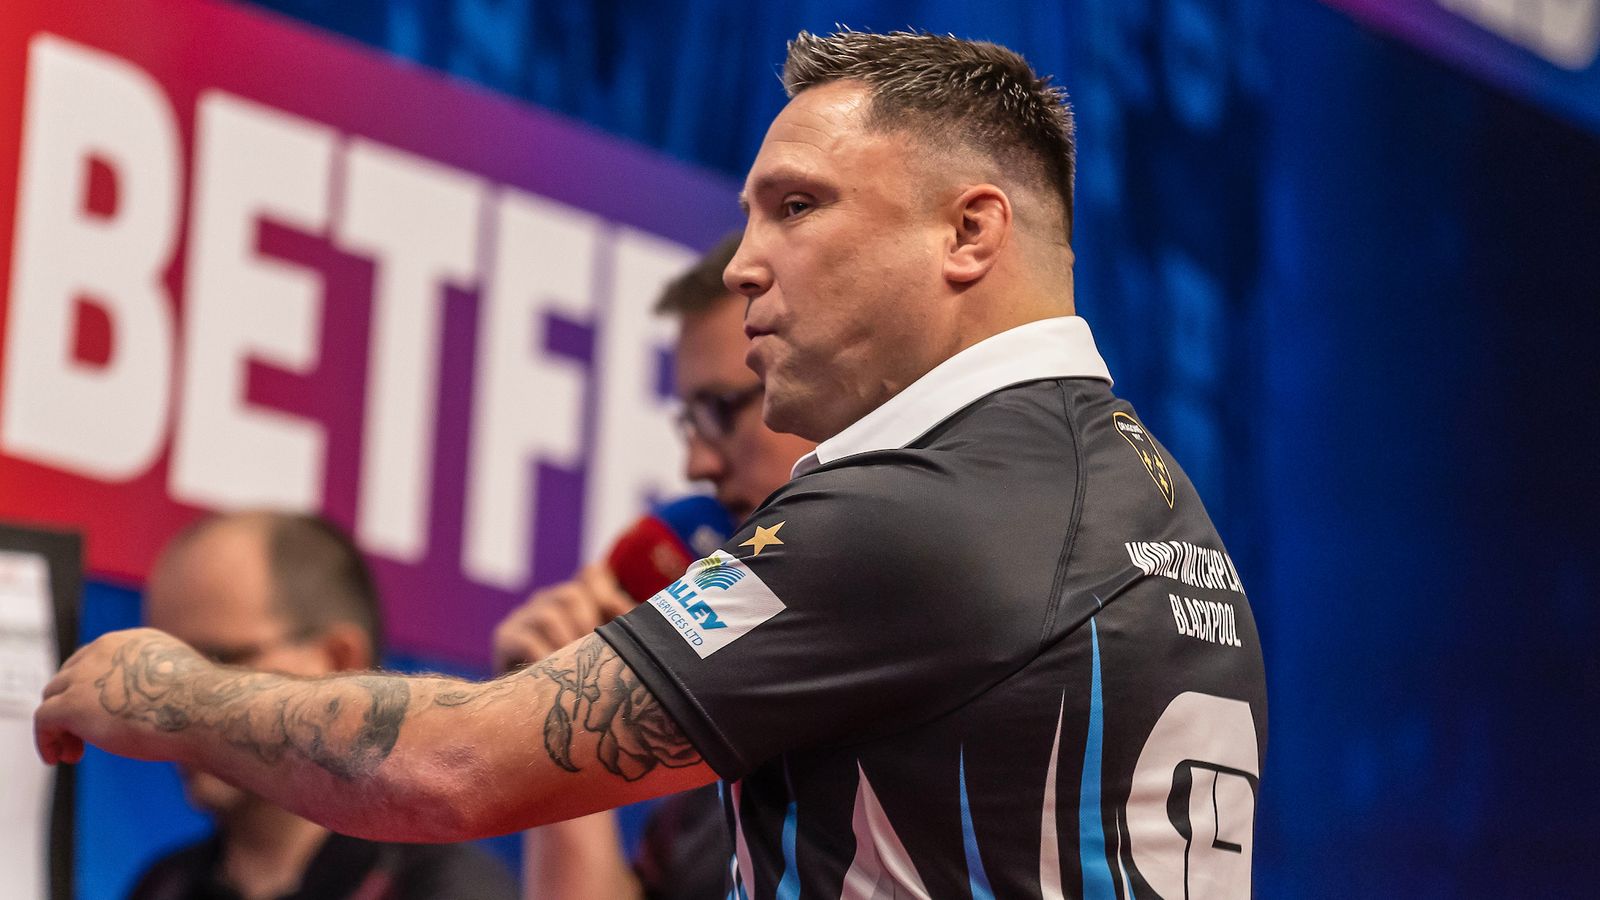 Gerwyn Price and Michael Smith eliminated from World Matchplay Darts in night of shocks | Darts News